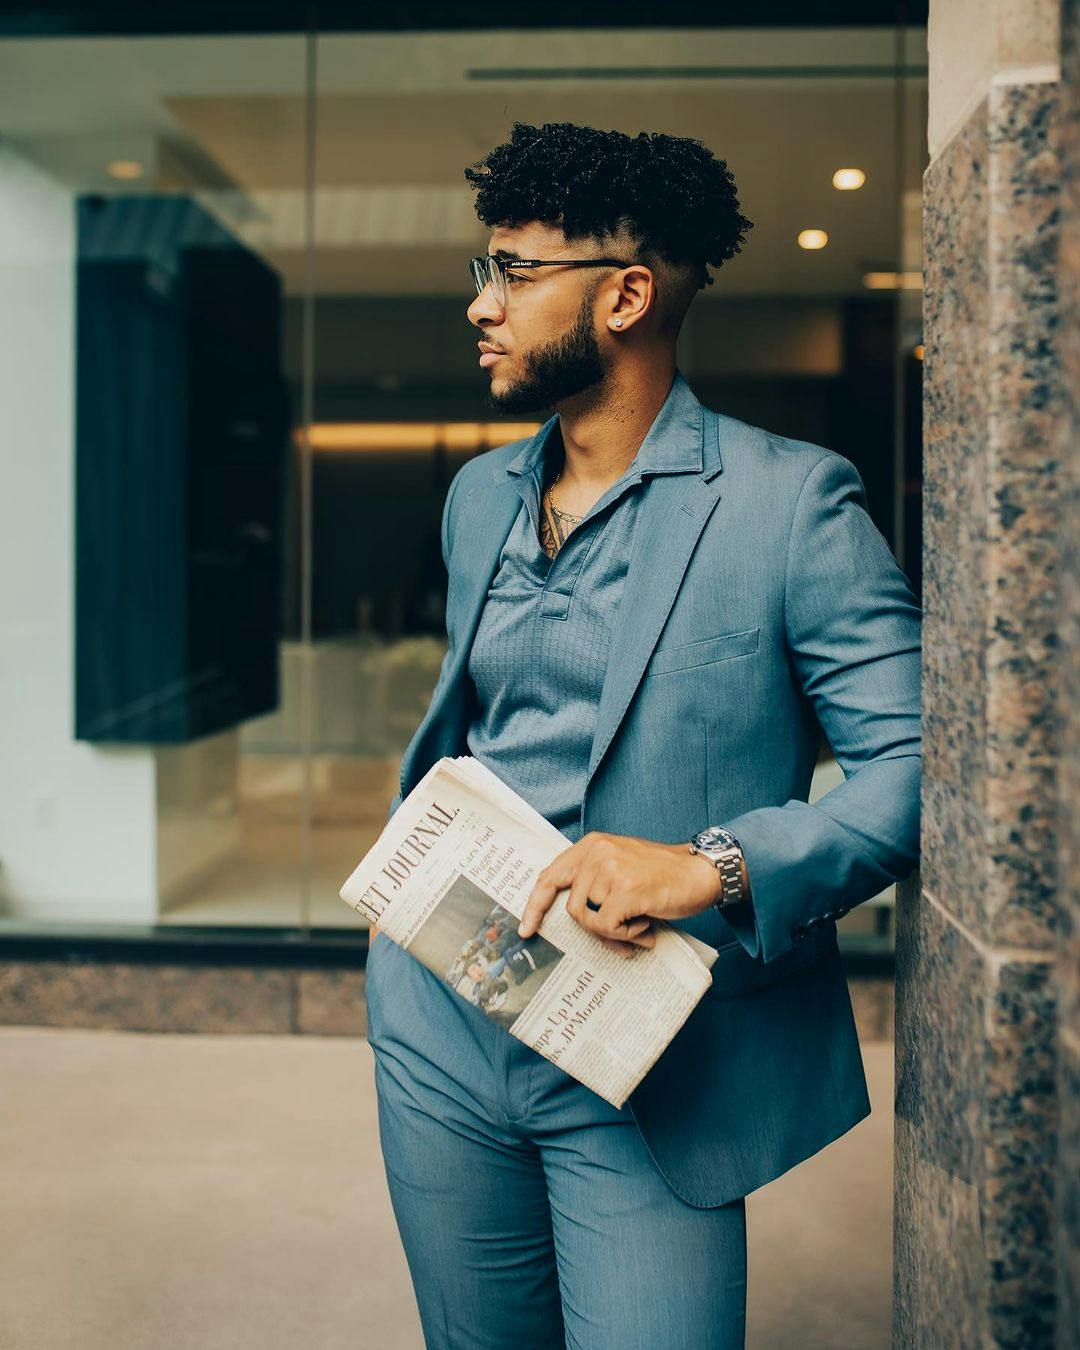 Cool menswear outfit for work with a light blue men's blazer, polo shirt, blue suit pants, and glasses in industrial shopping center.